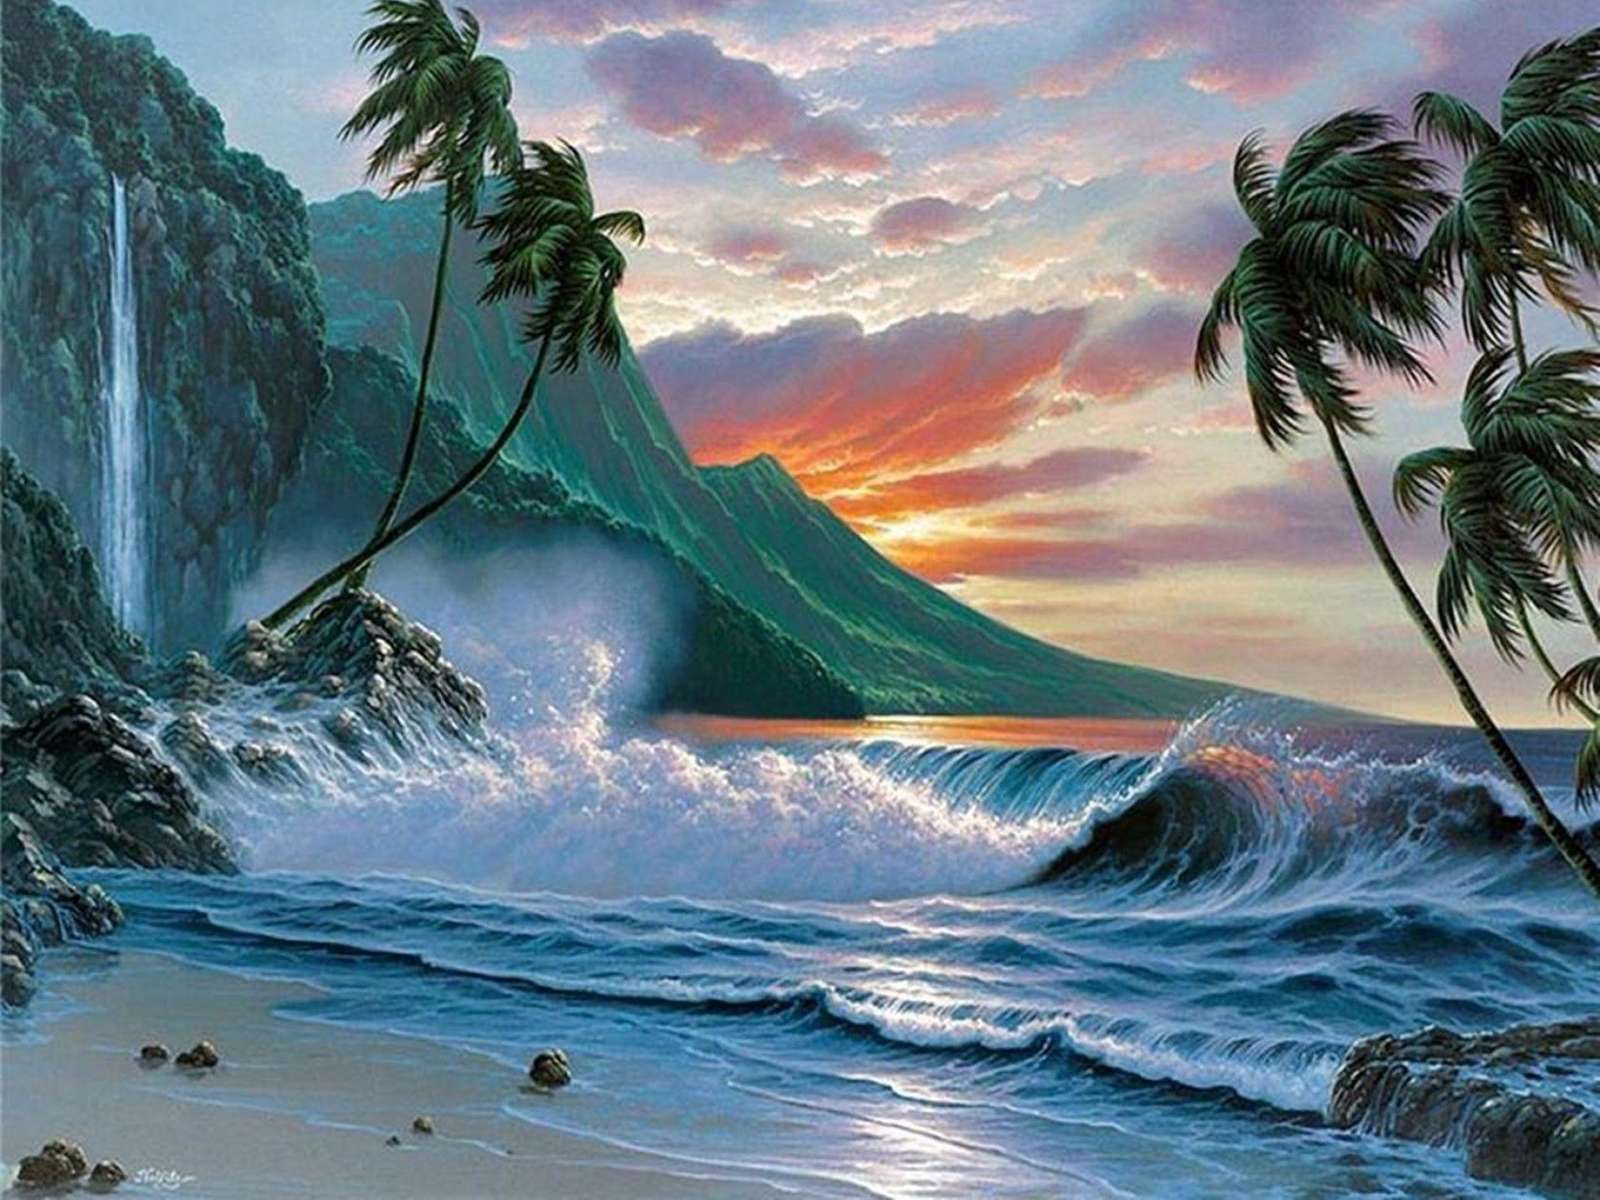 Palms In The Waves online puzzle